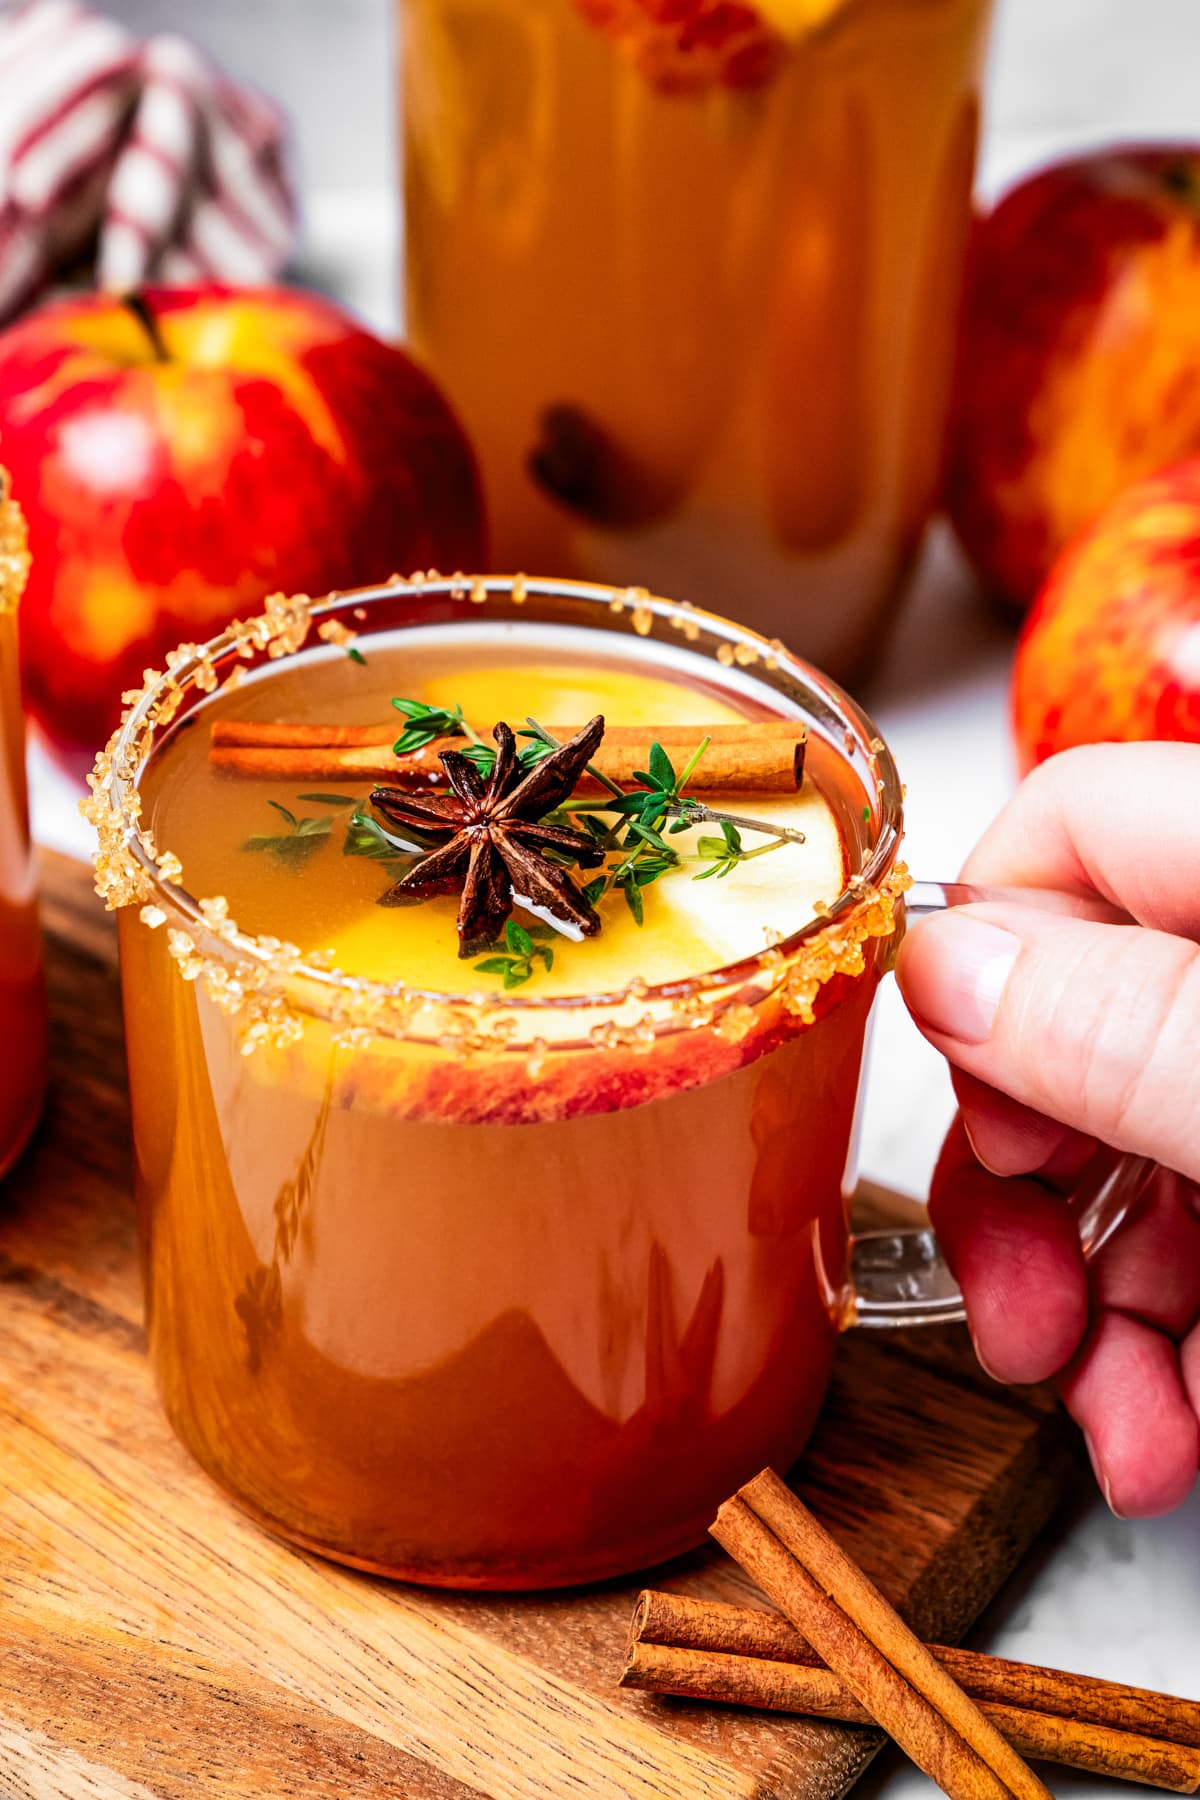 A hand holding a glass mug filled with spiked apple cider garnished with apple slices, thyme, anise, and a cinnamon stick.